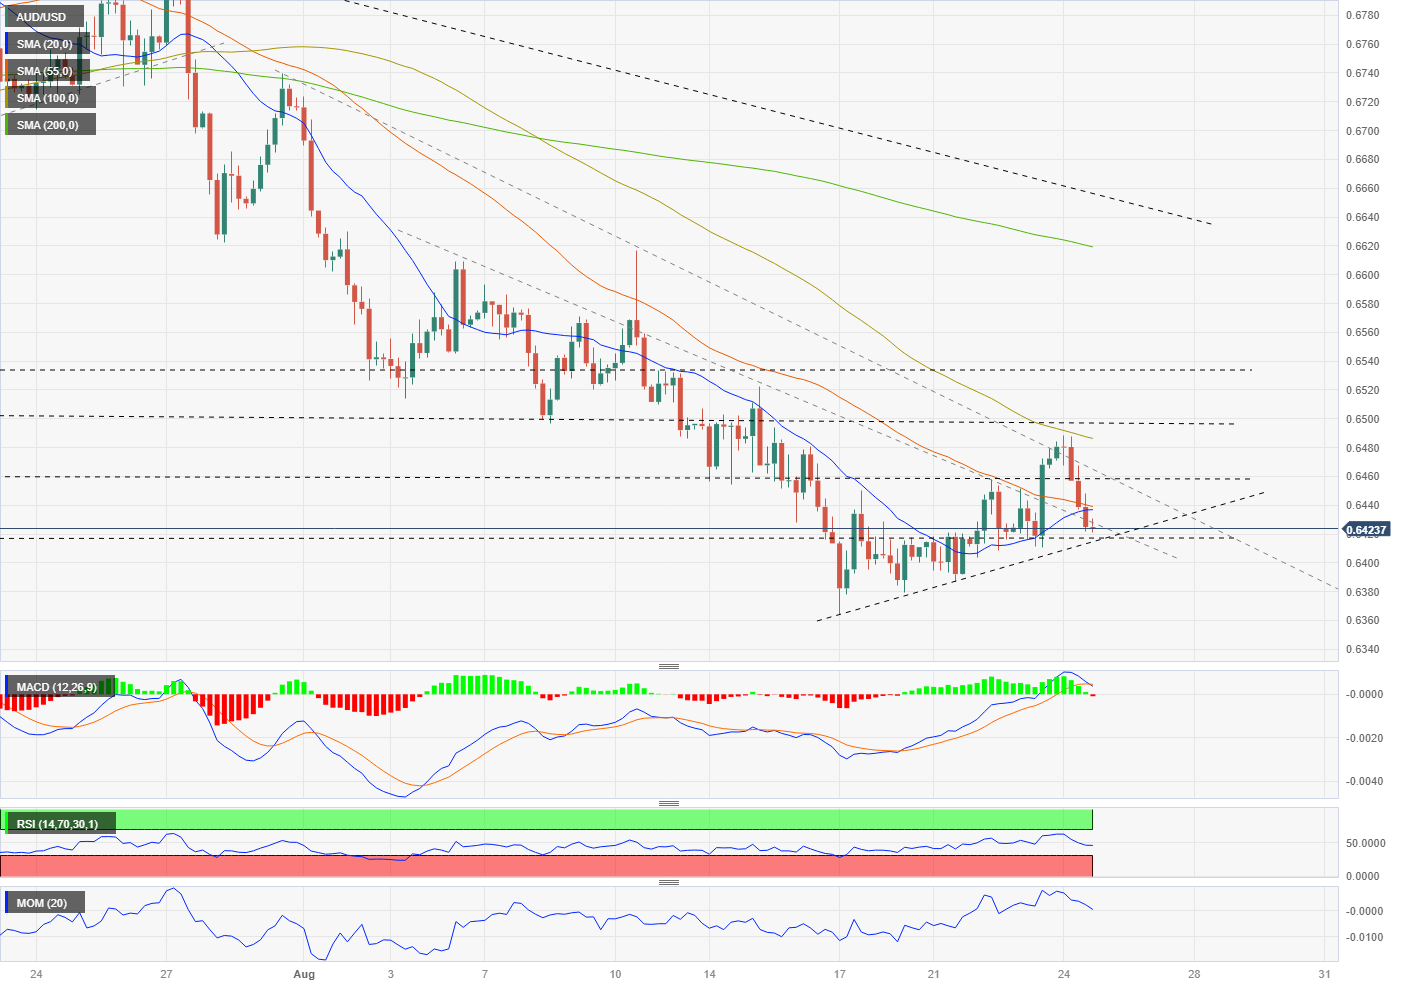 AUD/USD Forecast Risks remains tilted to the downside